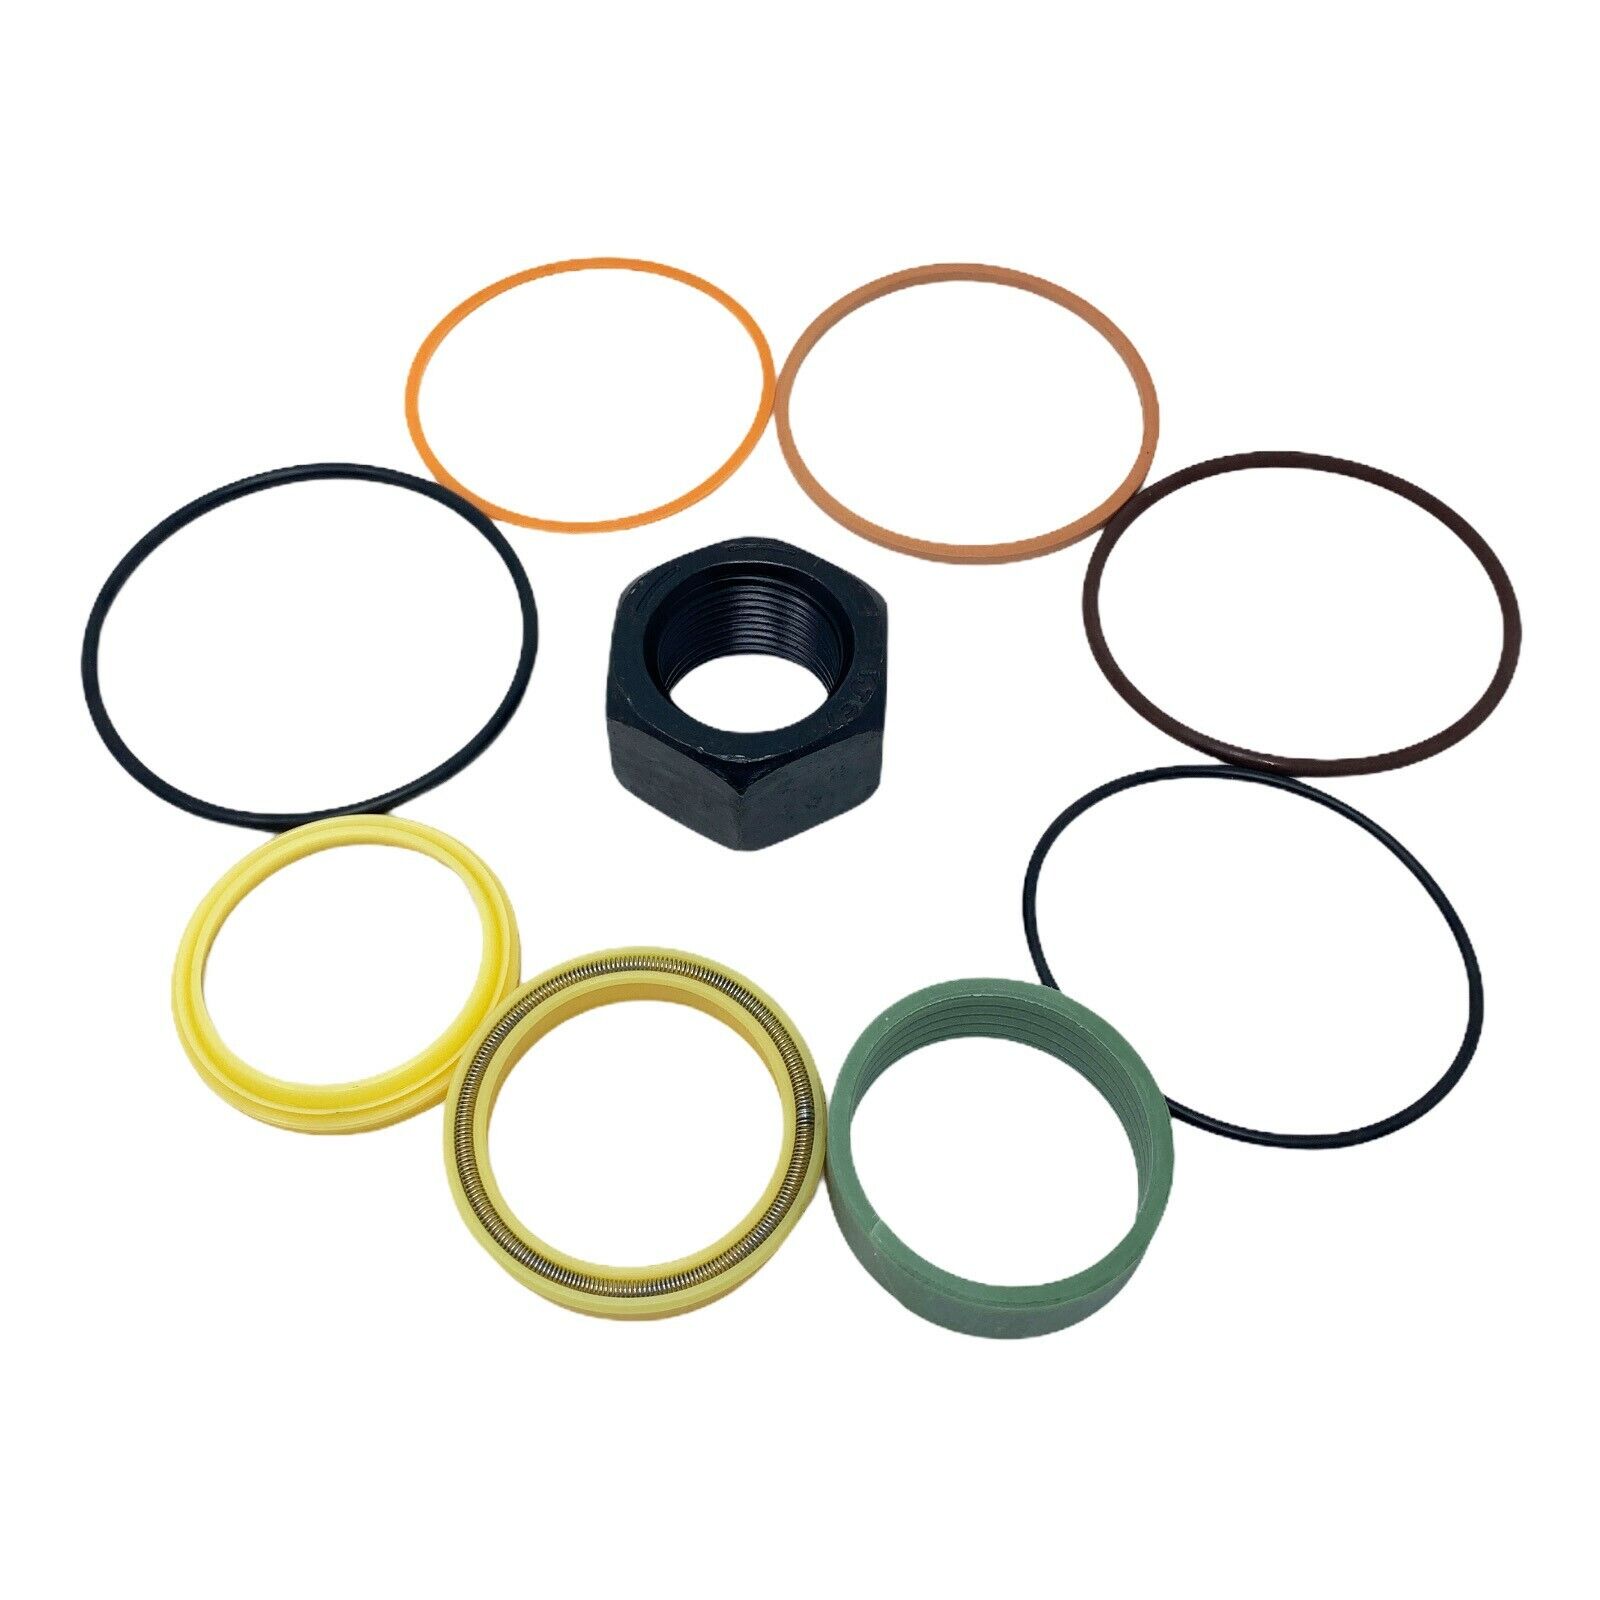 7225639 7137945 Cylinder Seal Kit Compatible With Bobcat S650 S770 T750 335 435